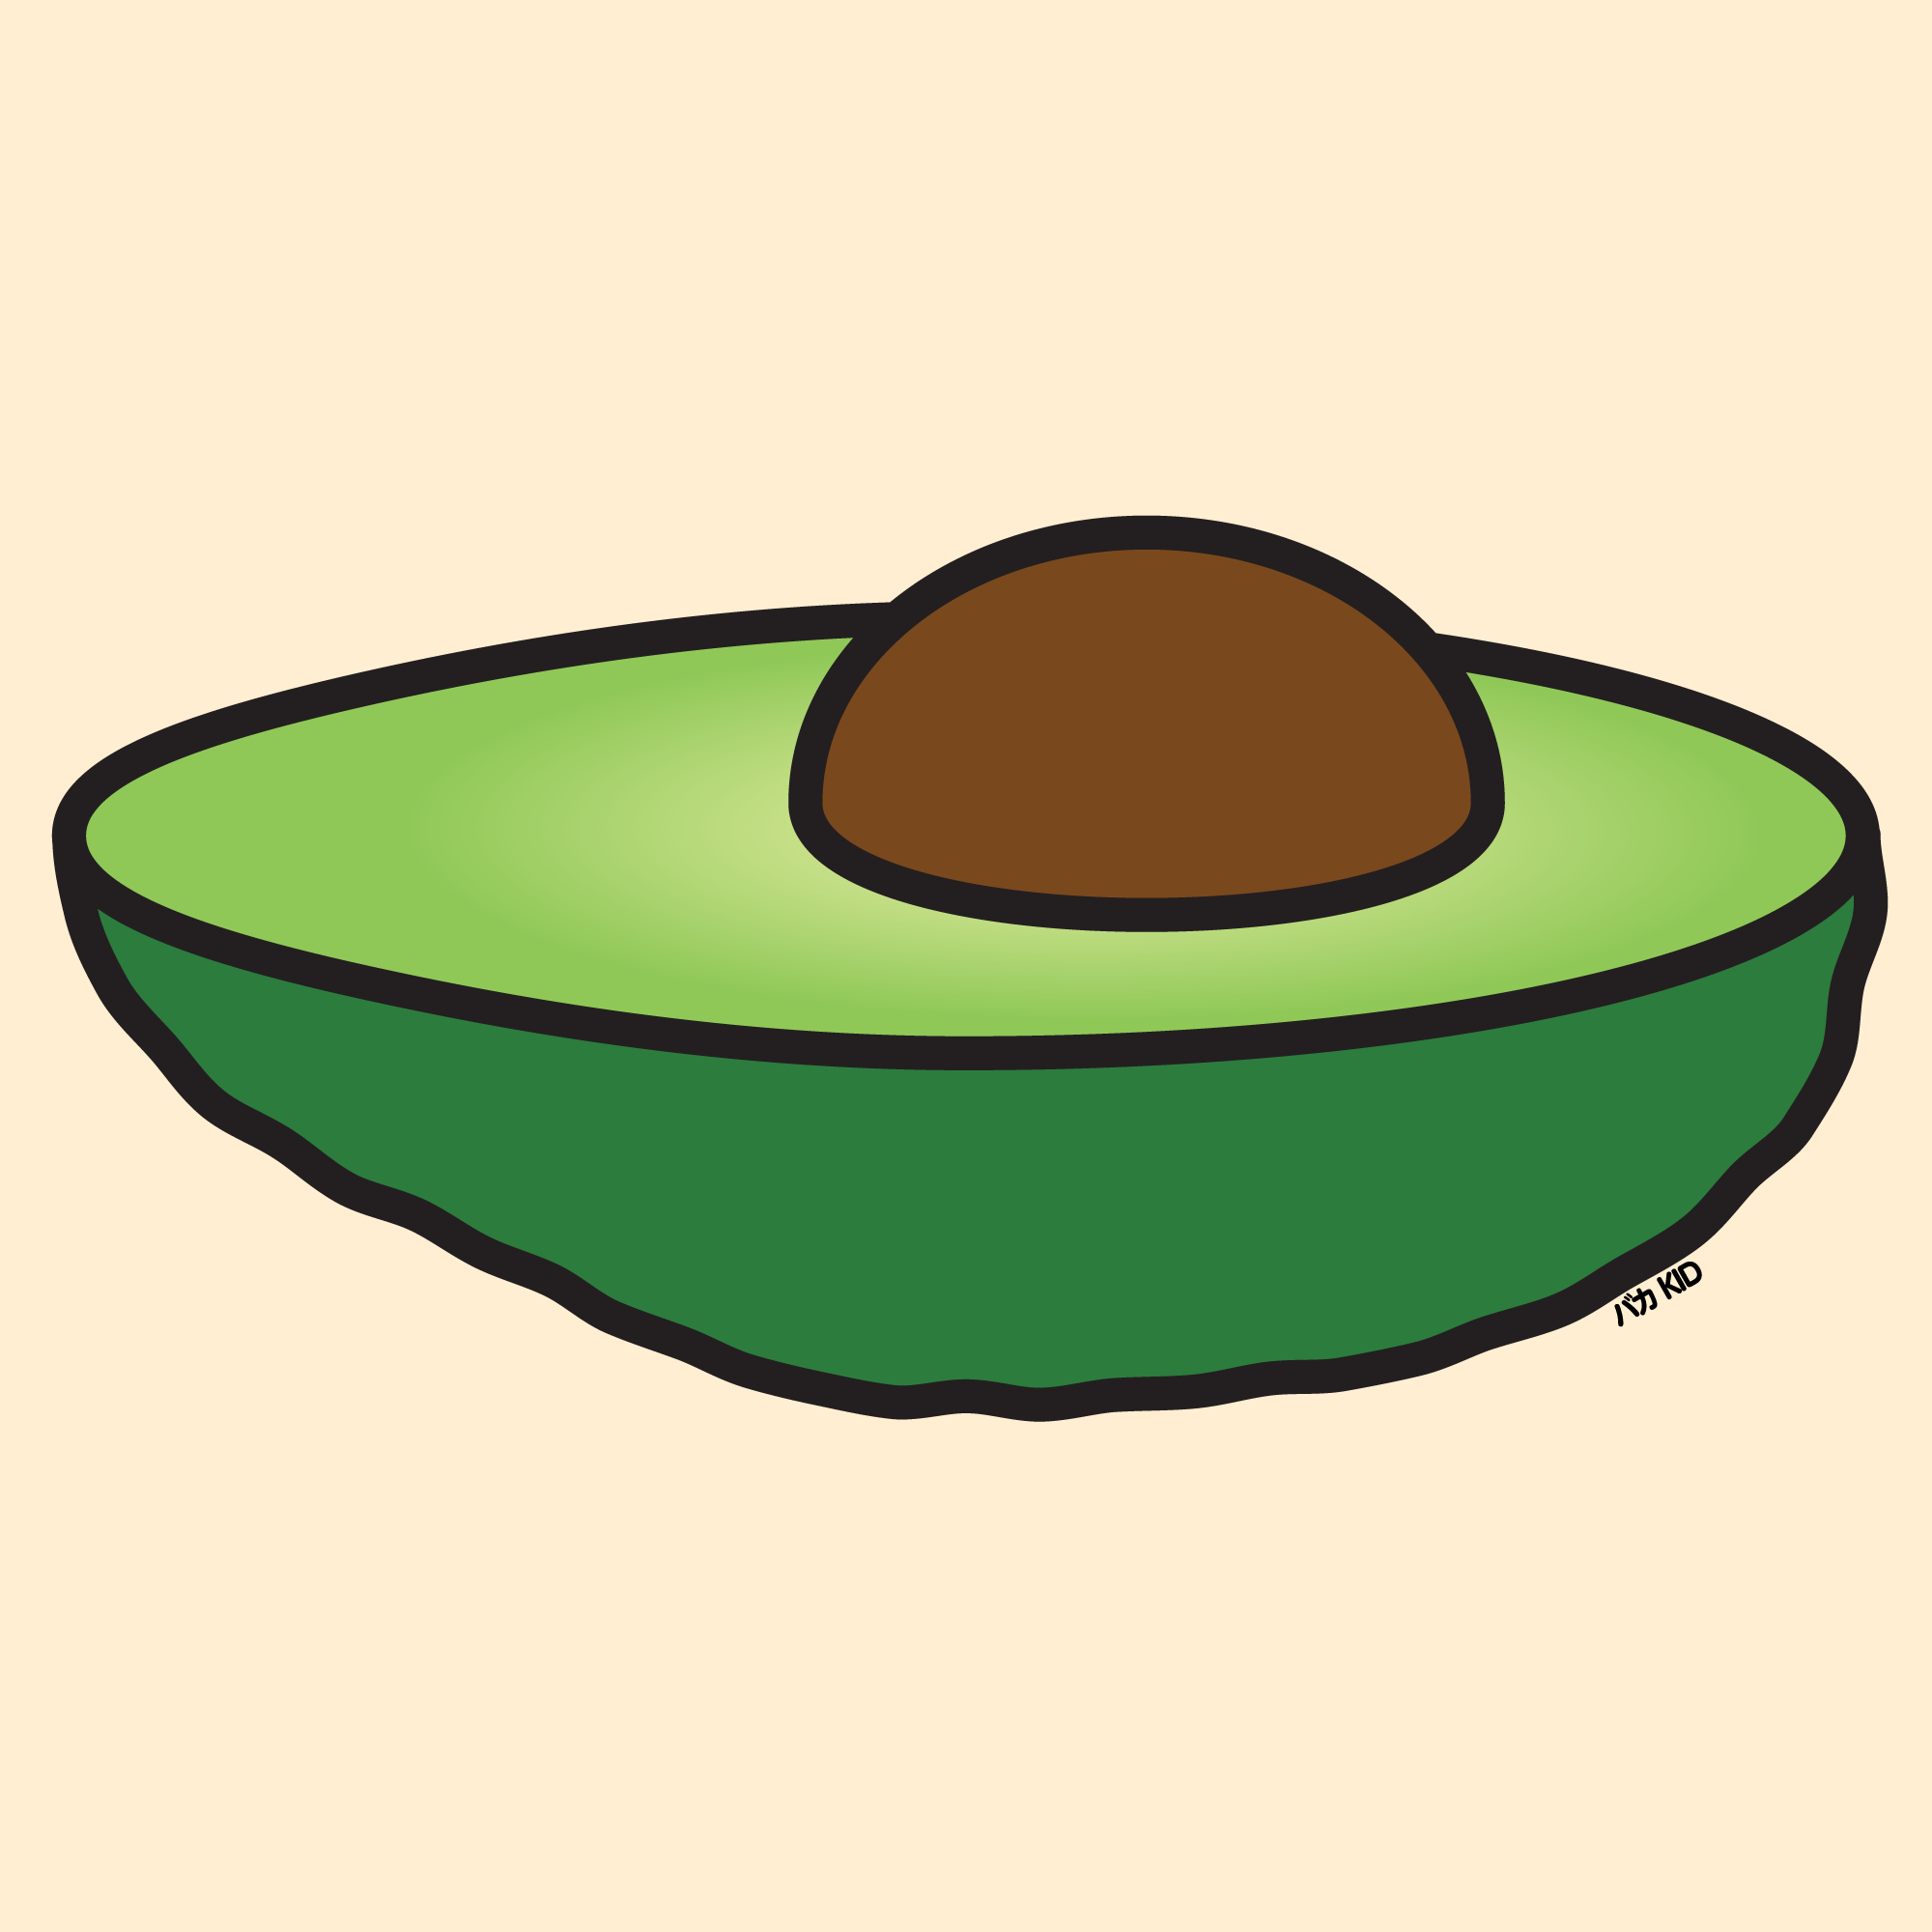 images/1701-Avocado.png